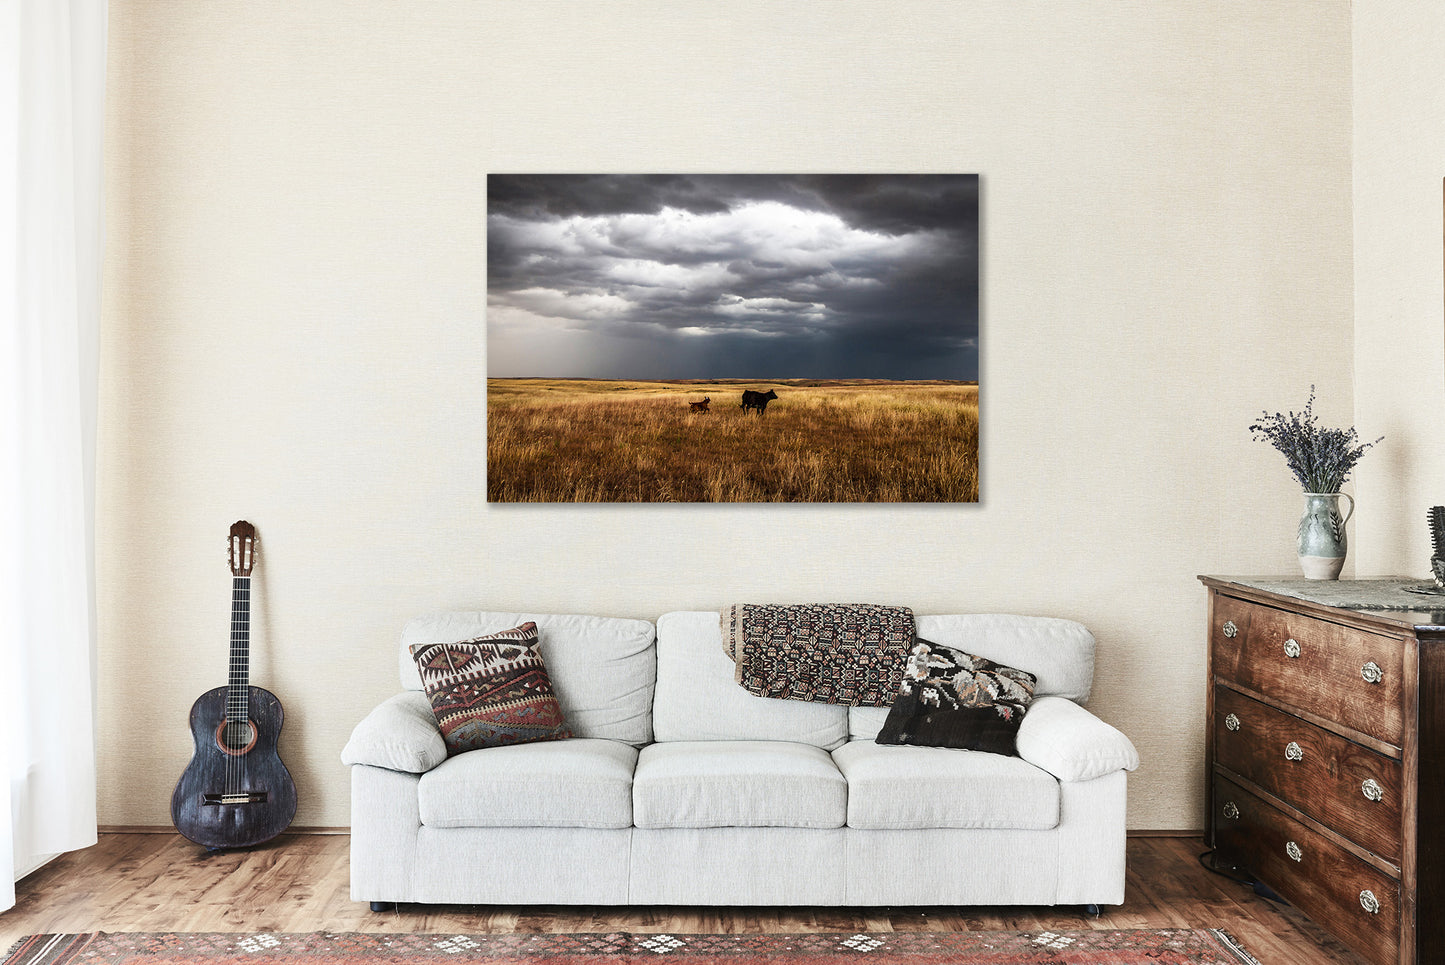 Cow and Calf Canvas | Cattle Gallery Wrap | Great Plains Photography | Oklahoma Wall Art | Western Decor | Ready to Hang